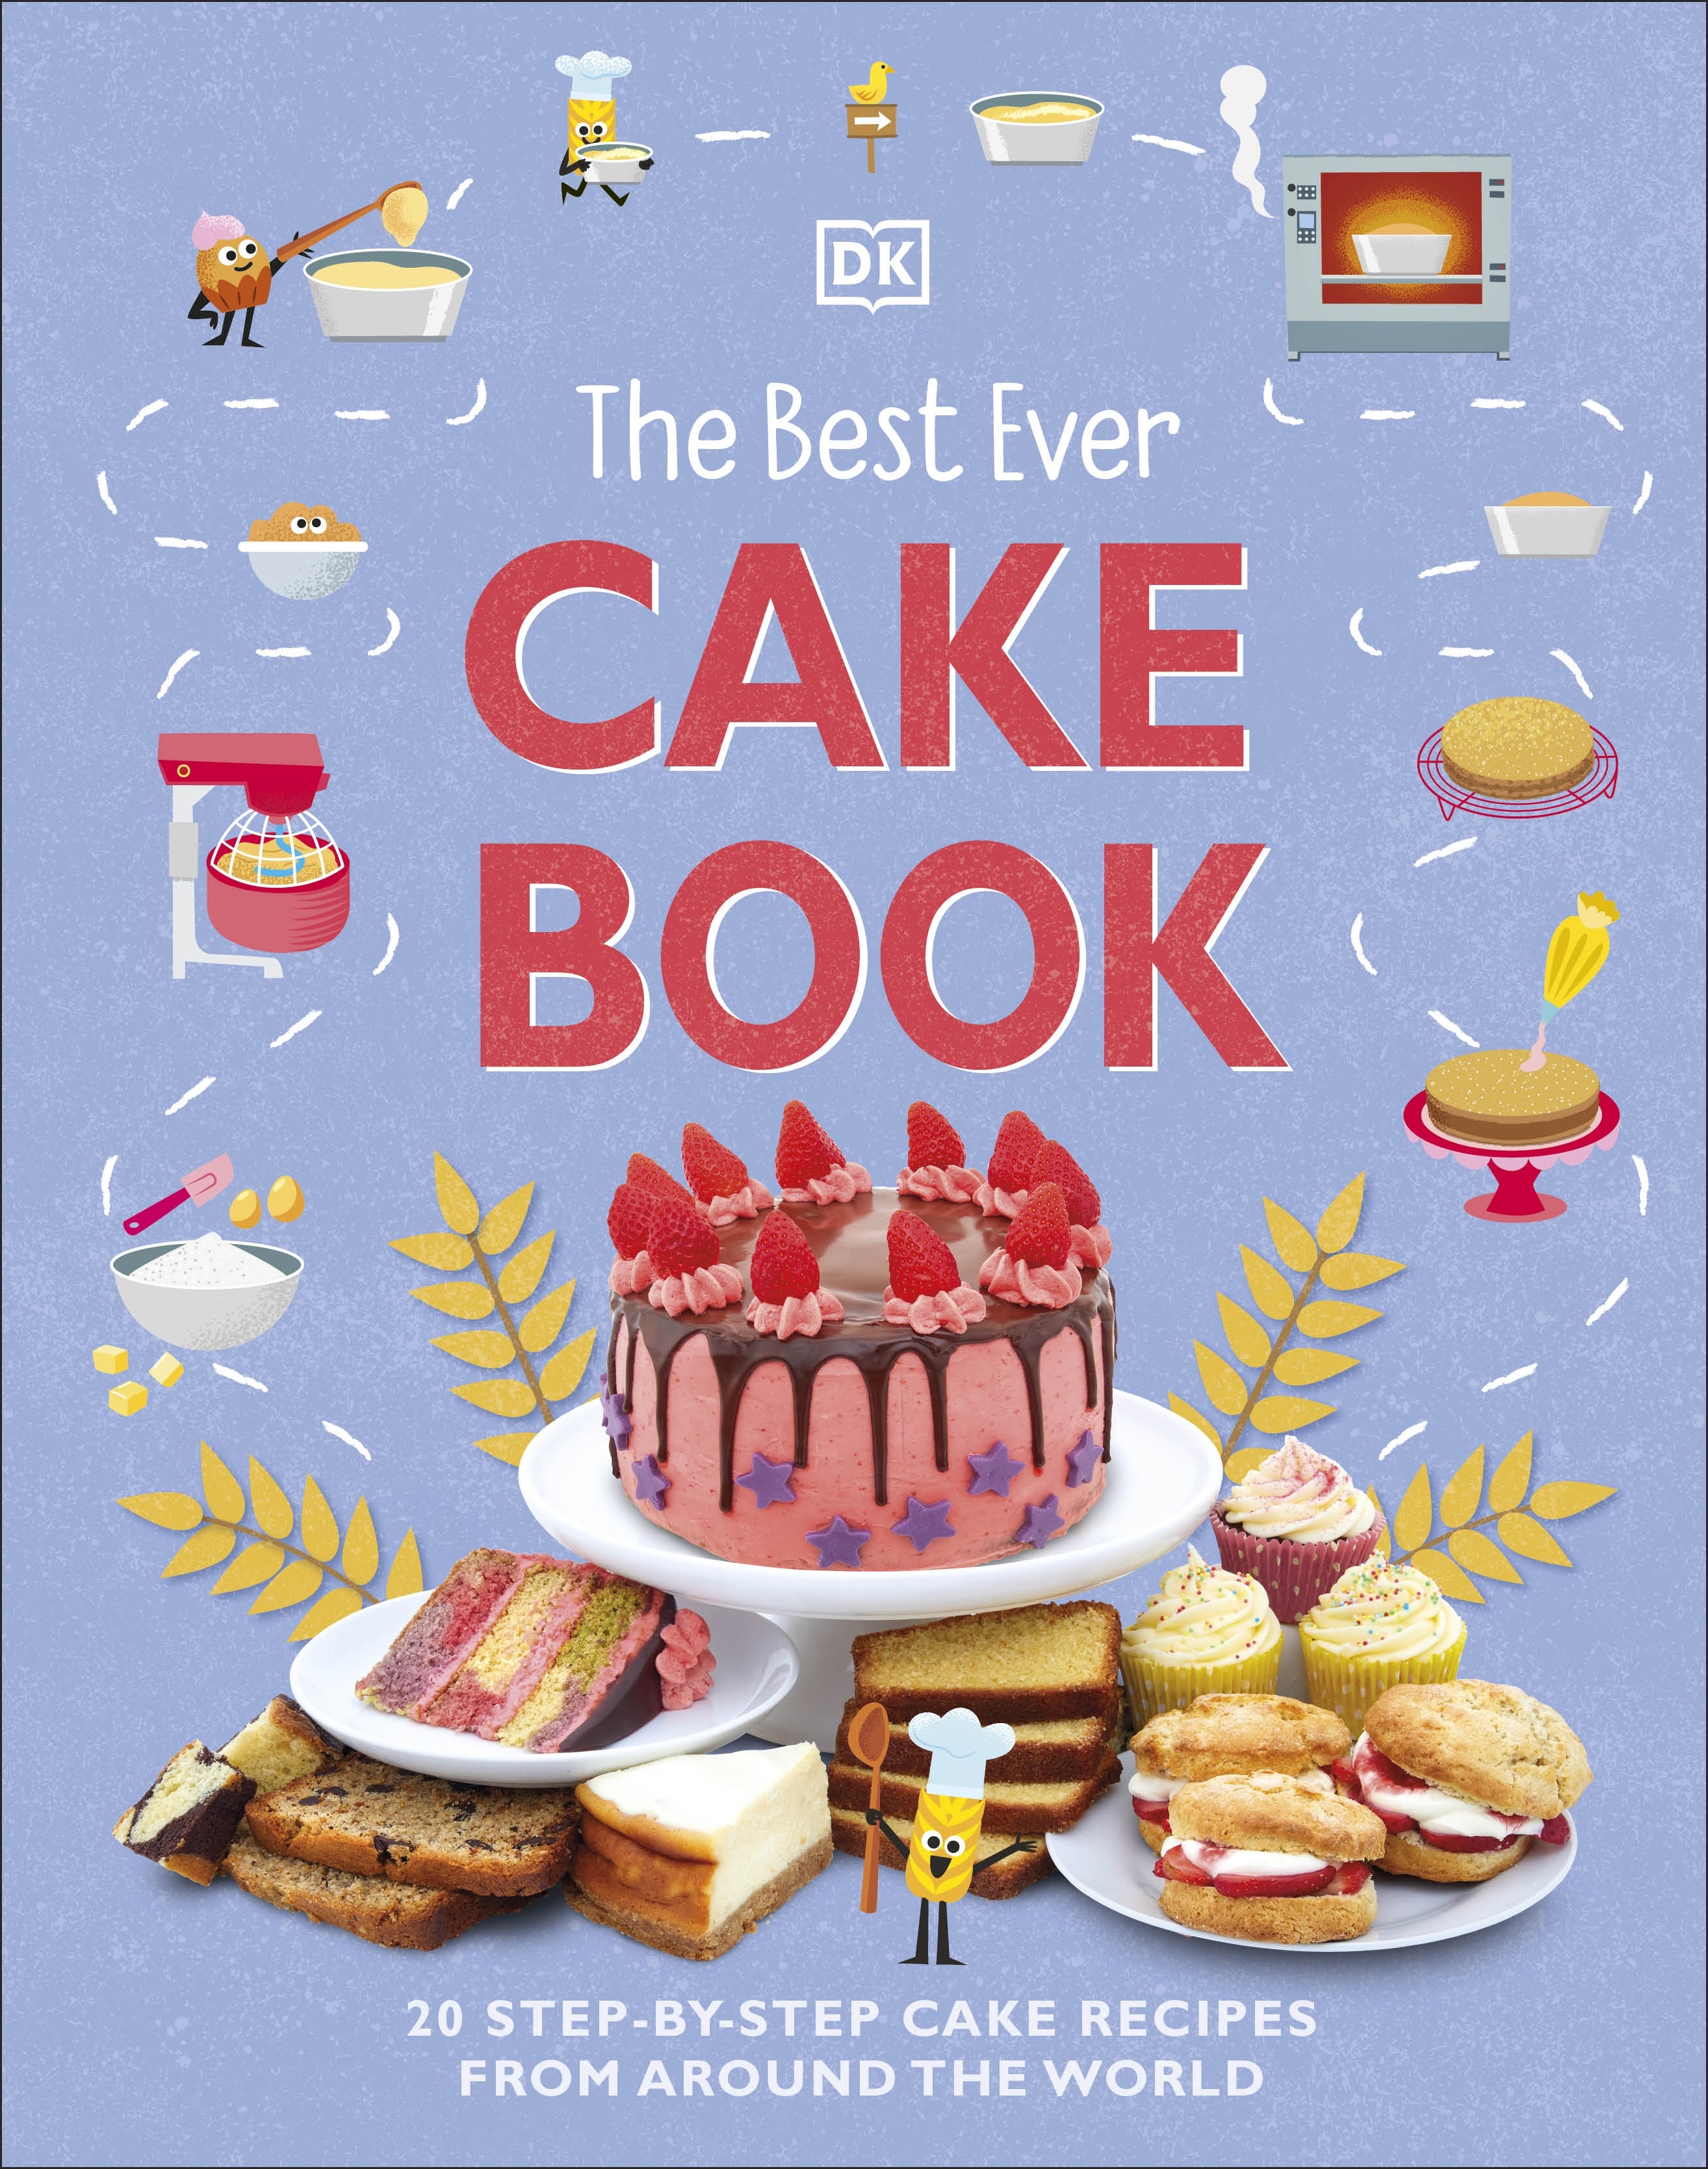 6 Cake Recipes Every Baker Should Have in Their Recipe Book - The Cooking  Foodie